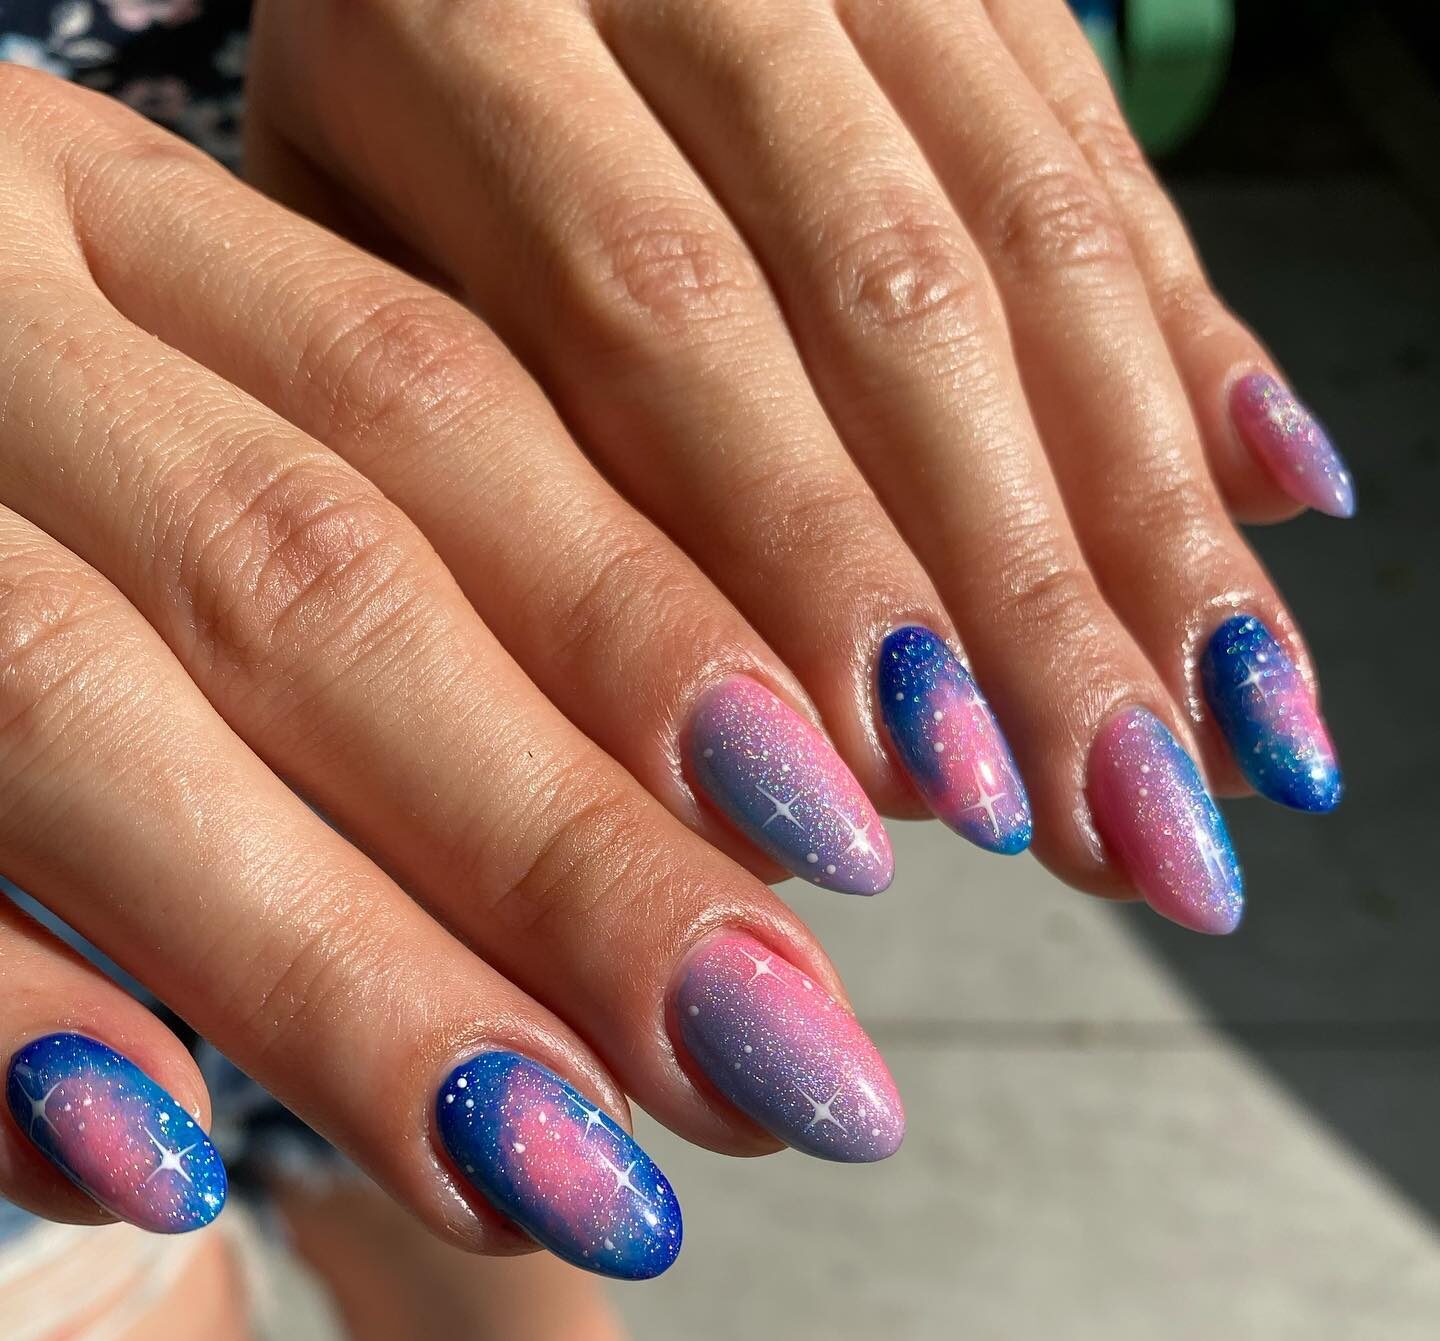 Light pink and blue nail colors with glittery galaxy-themed nail art on medium round nails